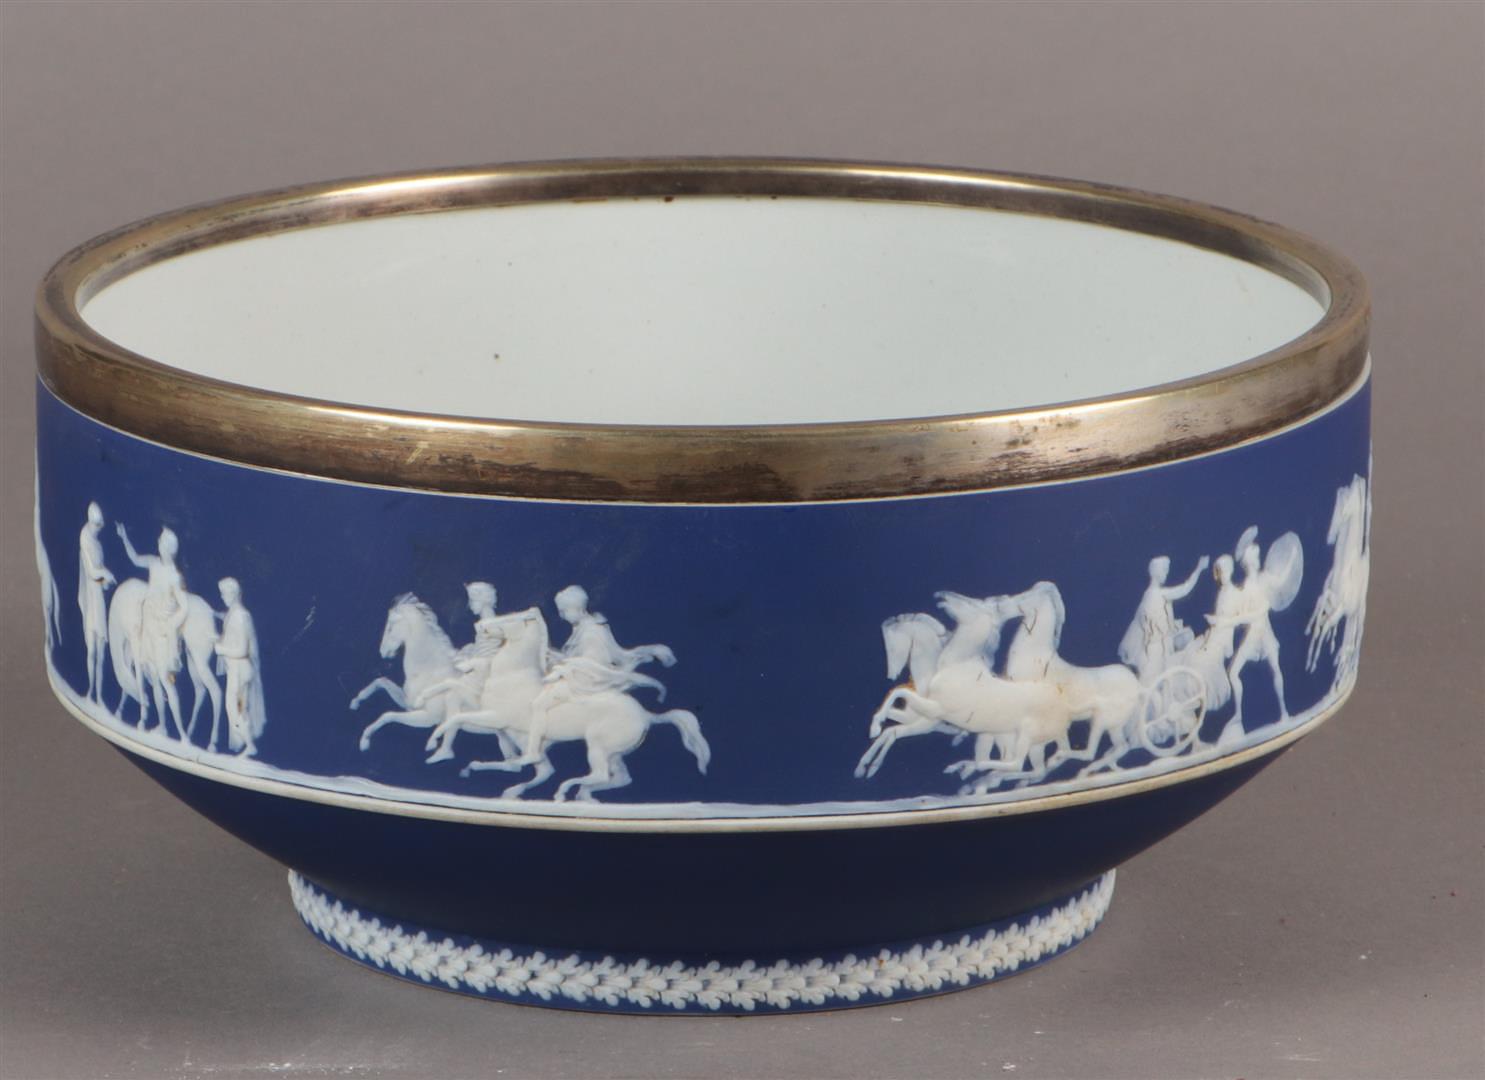 A Wedgwood dark blue Jasperware fruit bowl with decorative Greek relief and silver plated rim.